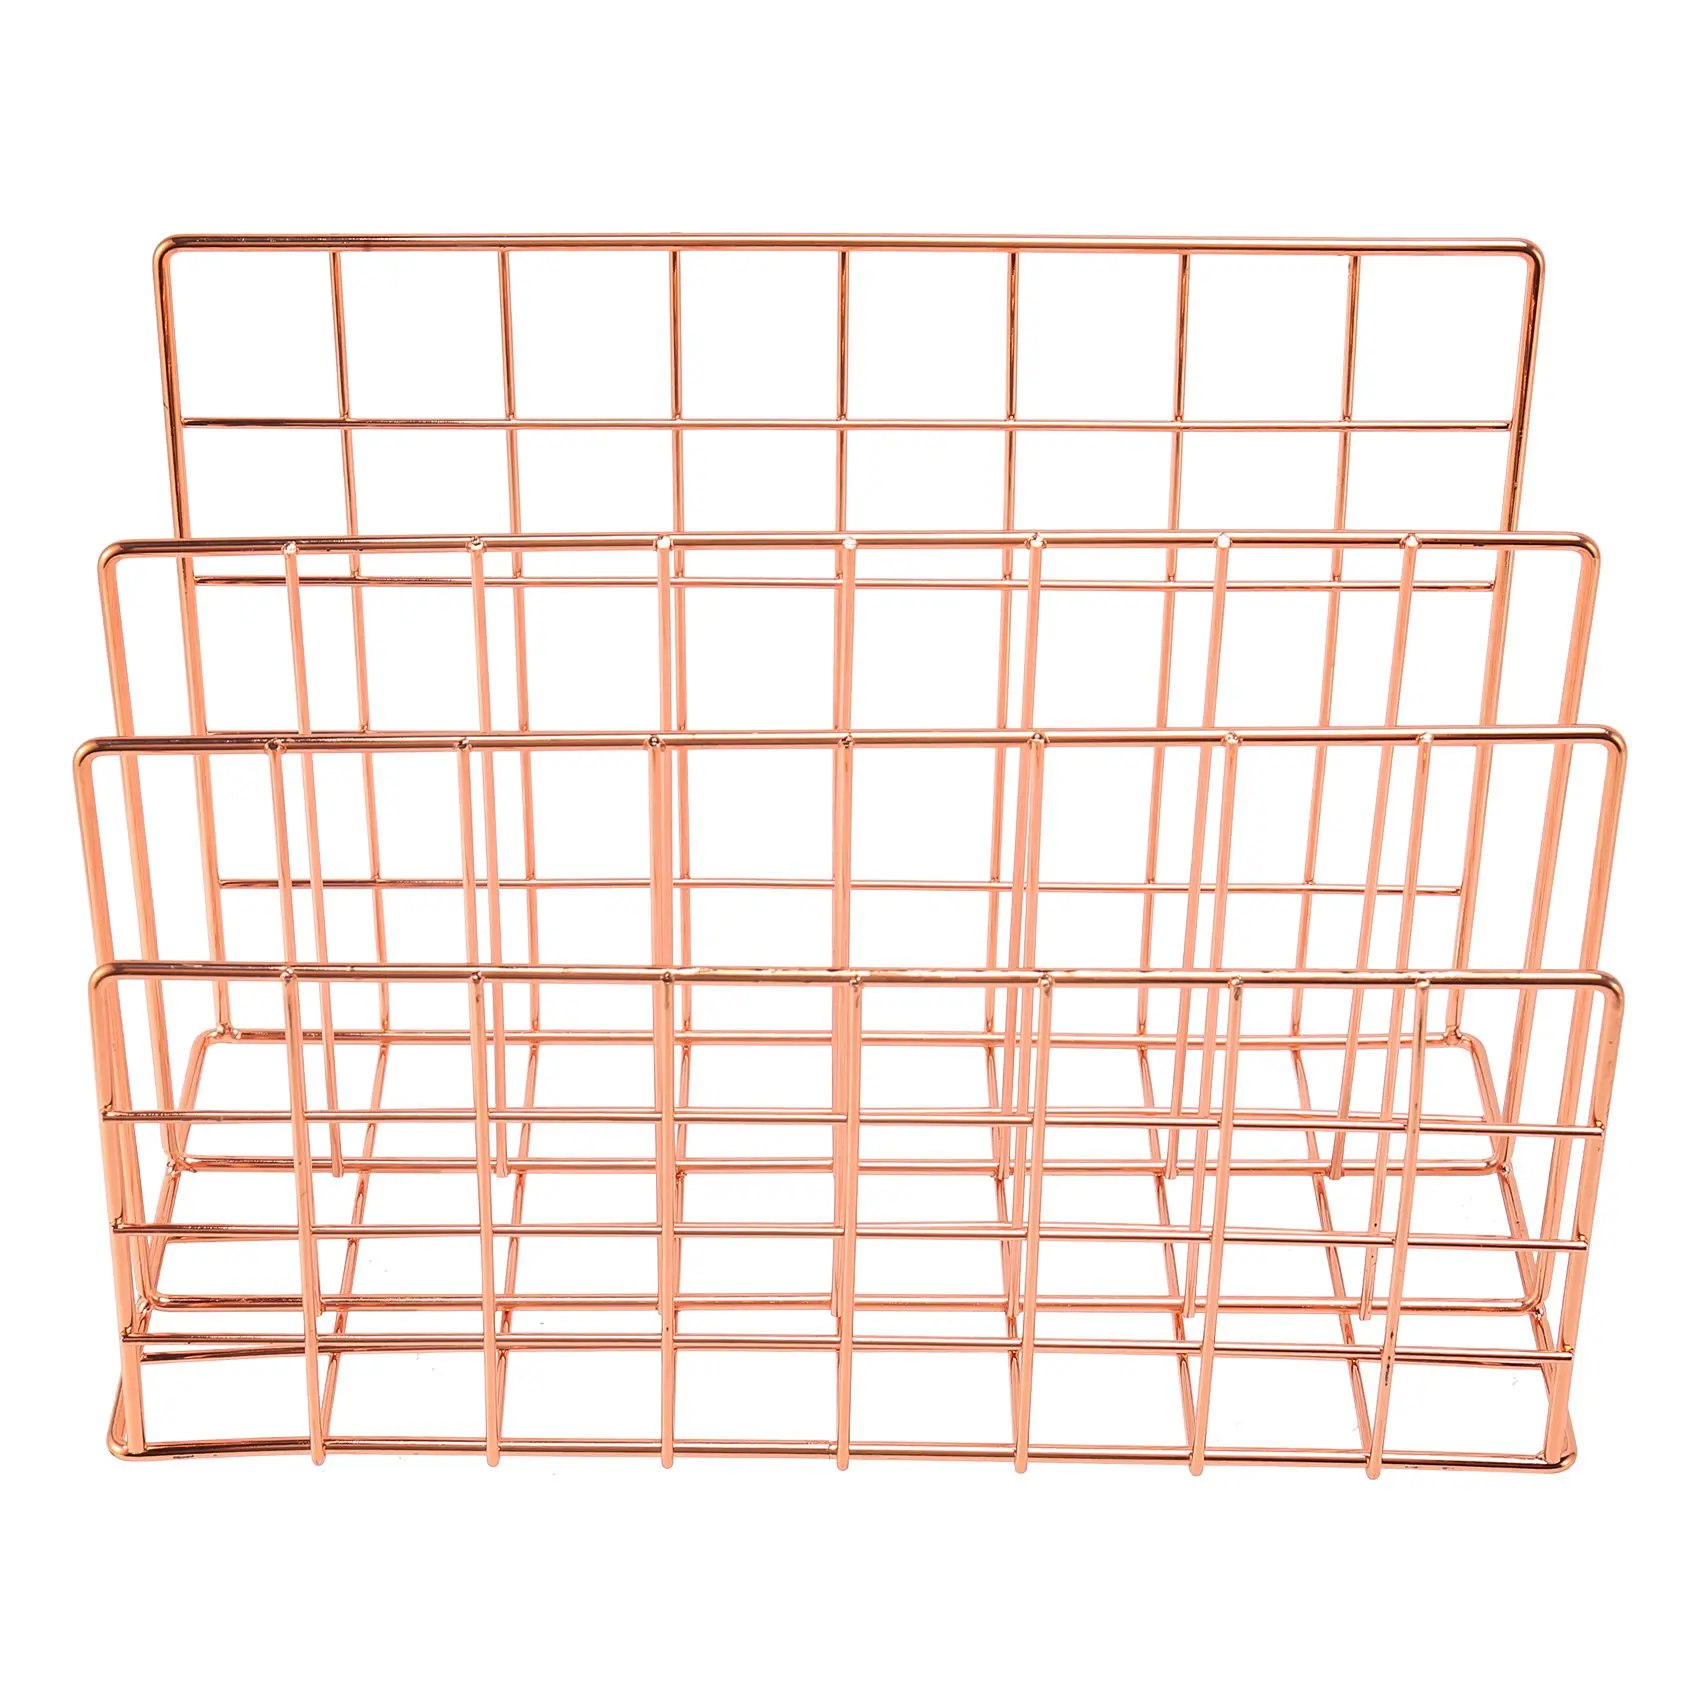 

Desktop Mail Organizer, 3-Slot Metal Wire Mail Sorter, Letter Organizer for Letters, Mails, Books, Postcards and More, Mail H